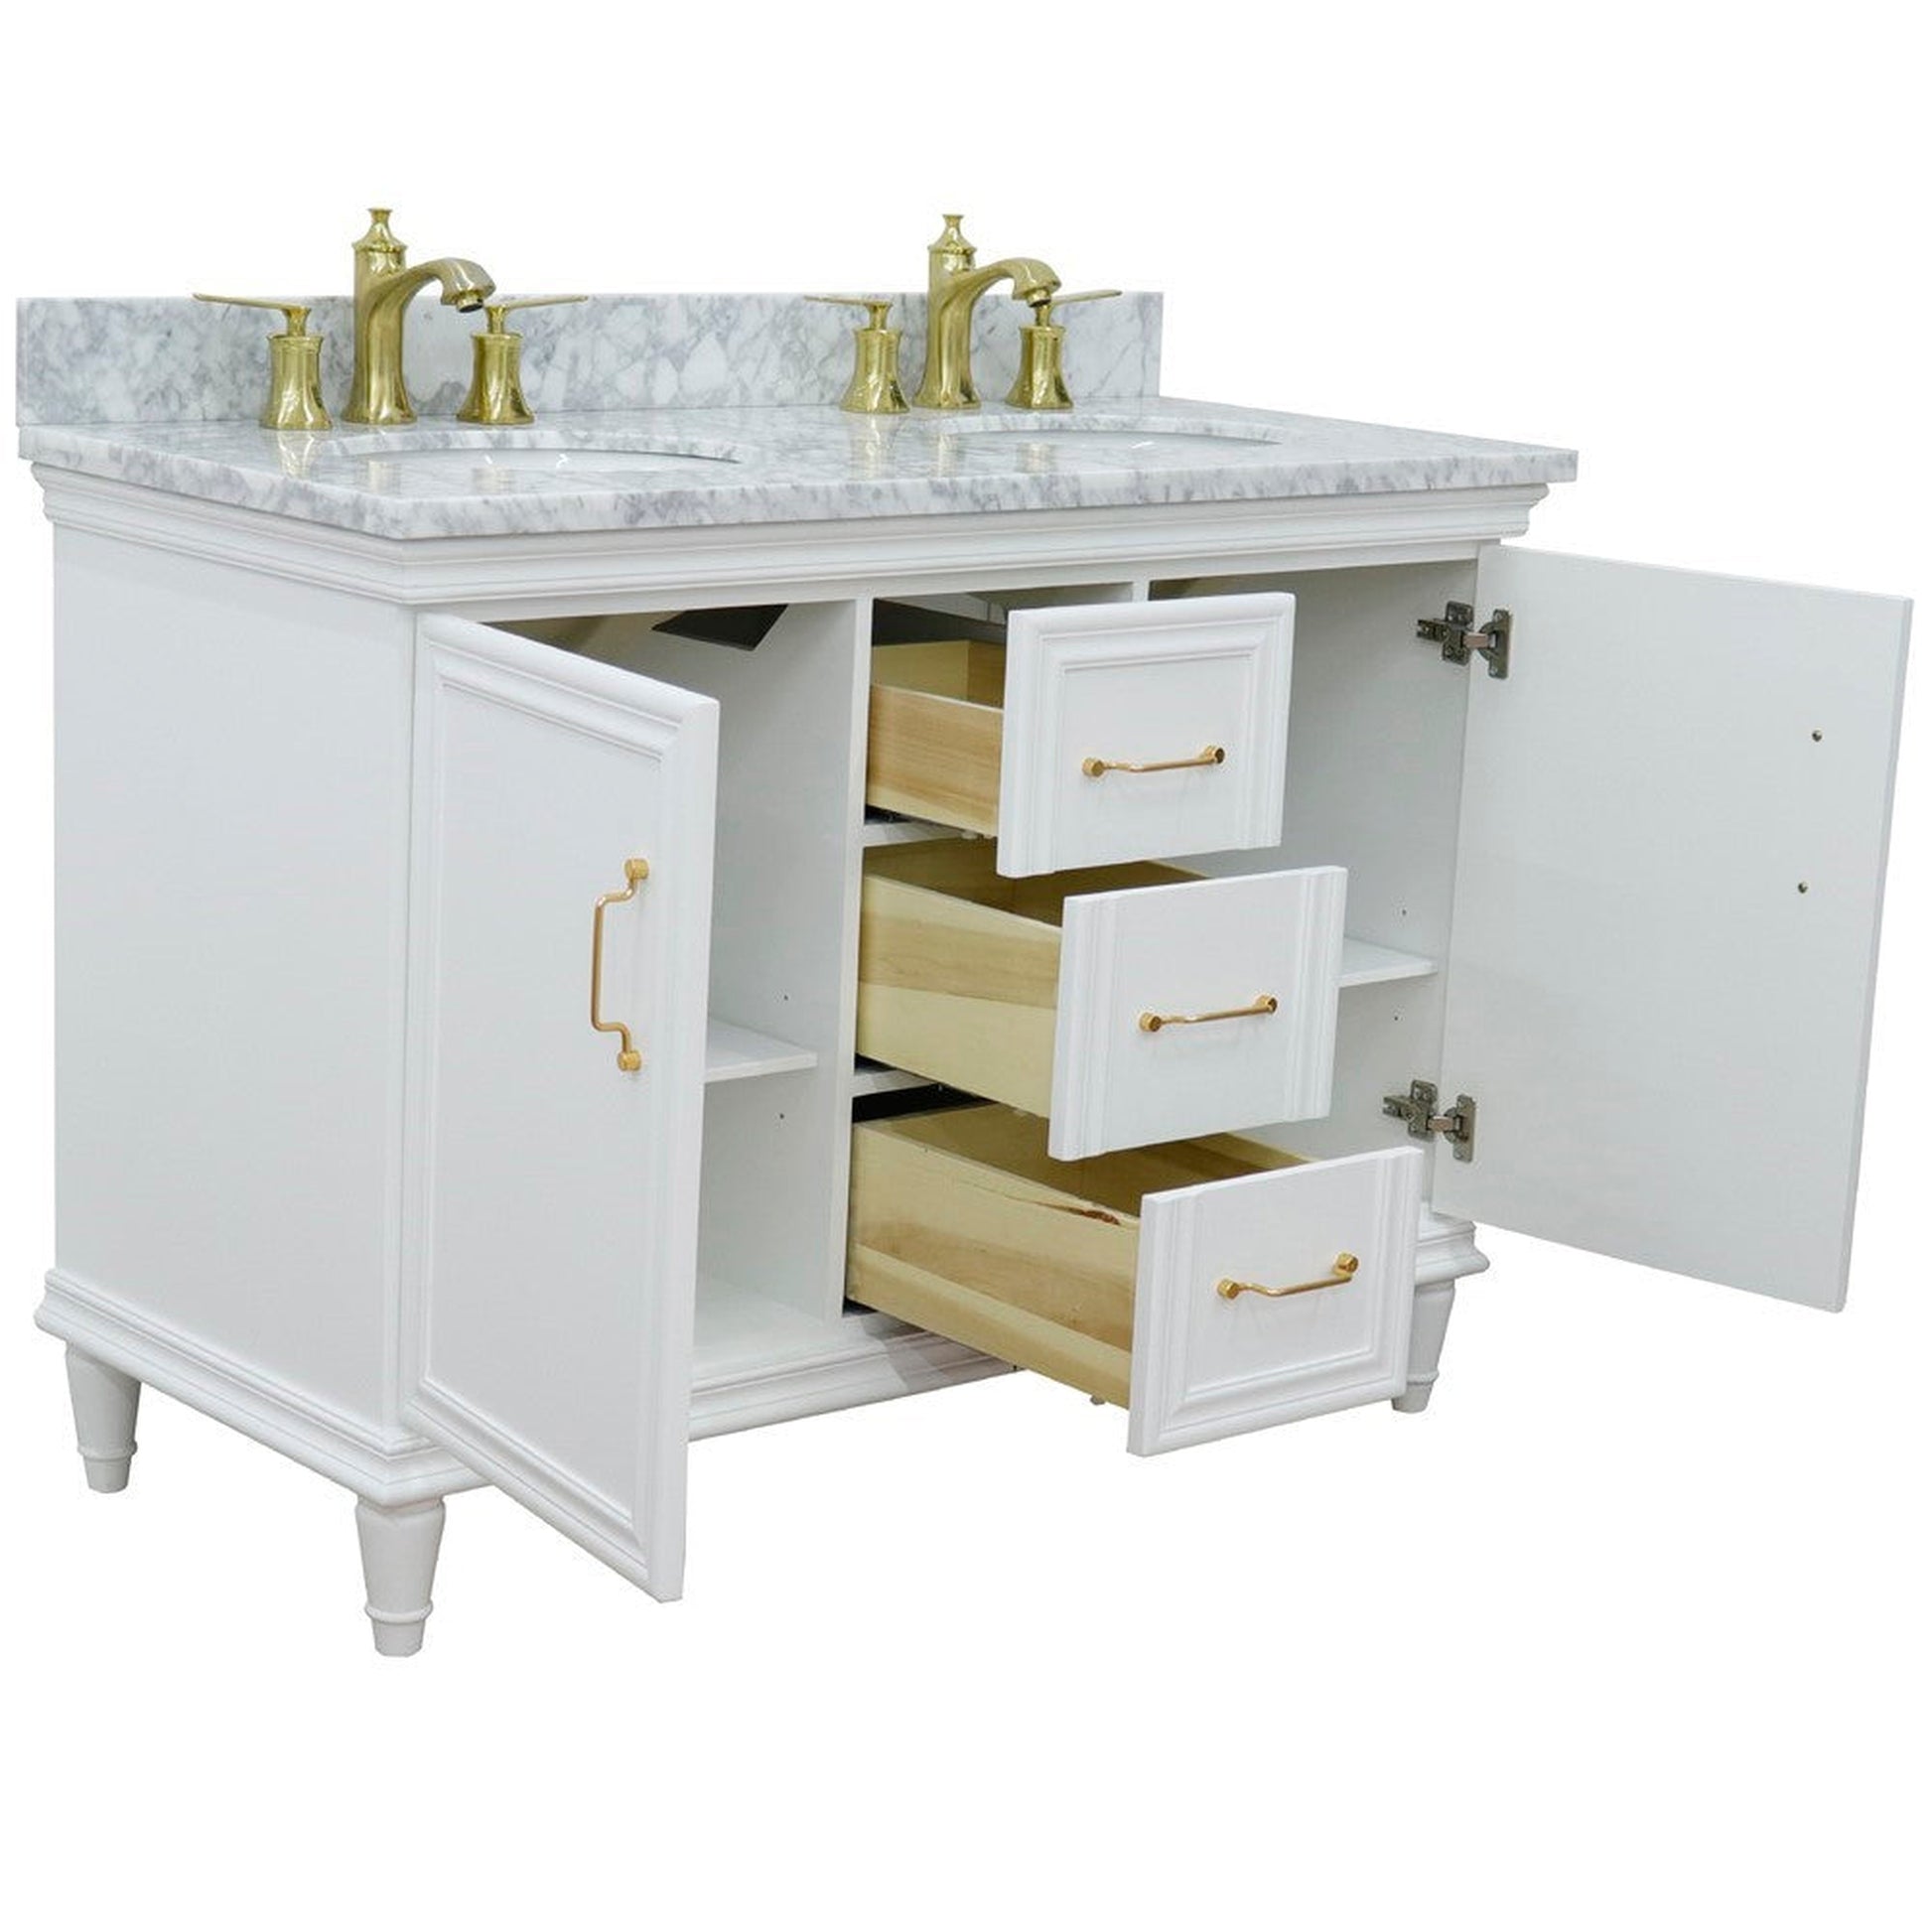 Bellaterra Home Forli 49" 2-Door 3-Drawer White Freestanding Vanity Set With Ceramic Double Undermount Oval Sink and White Carrara Marble Top